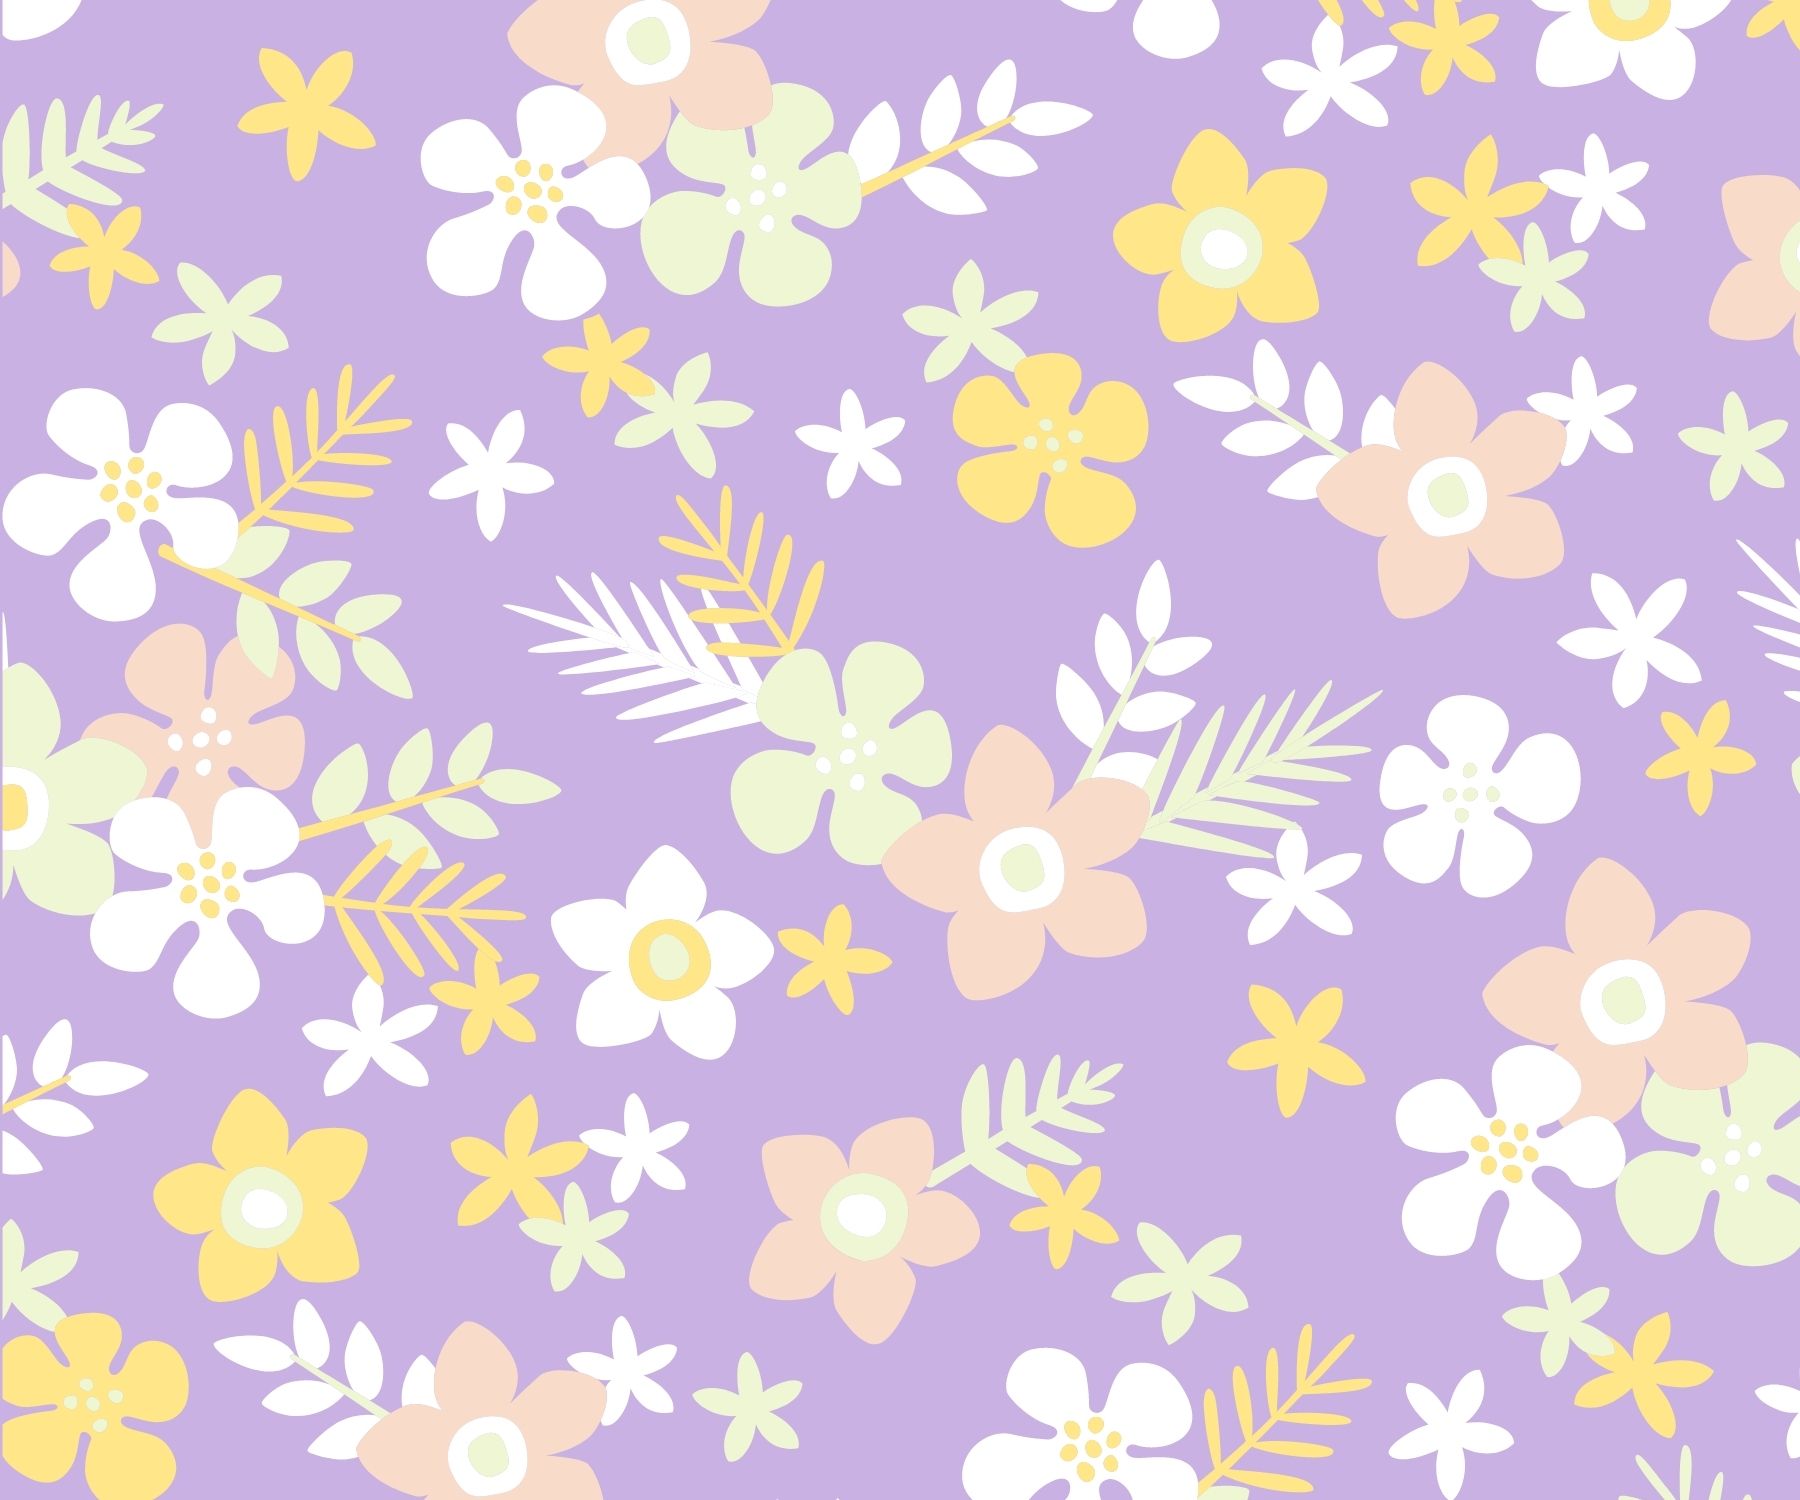 A pattern of flowers on purple background - Spring